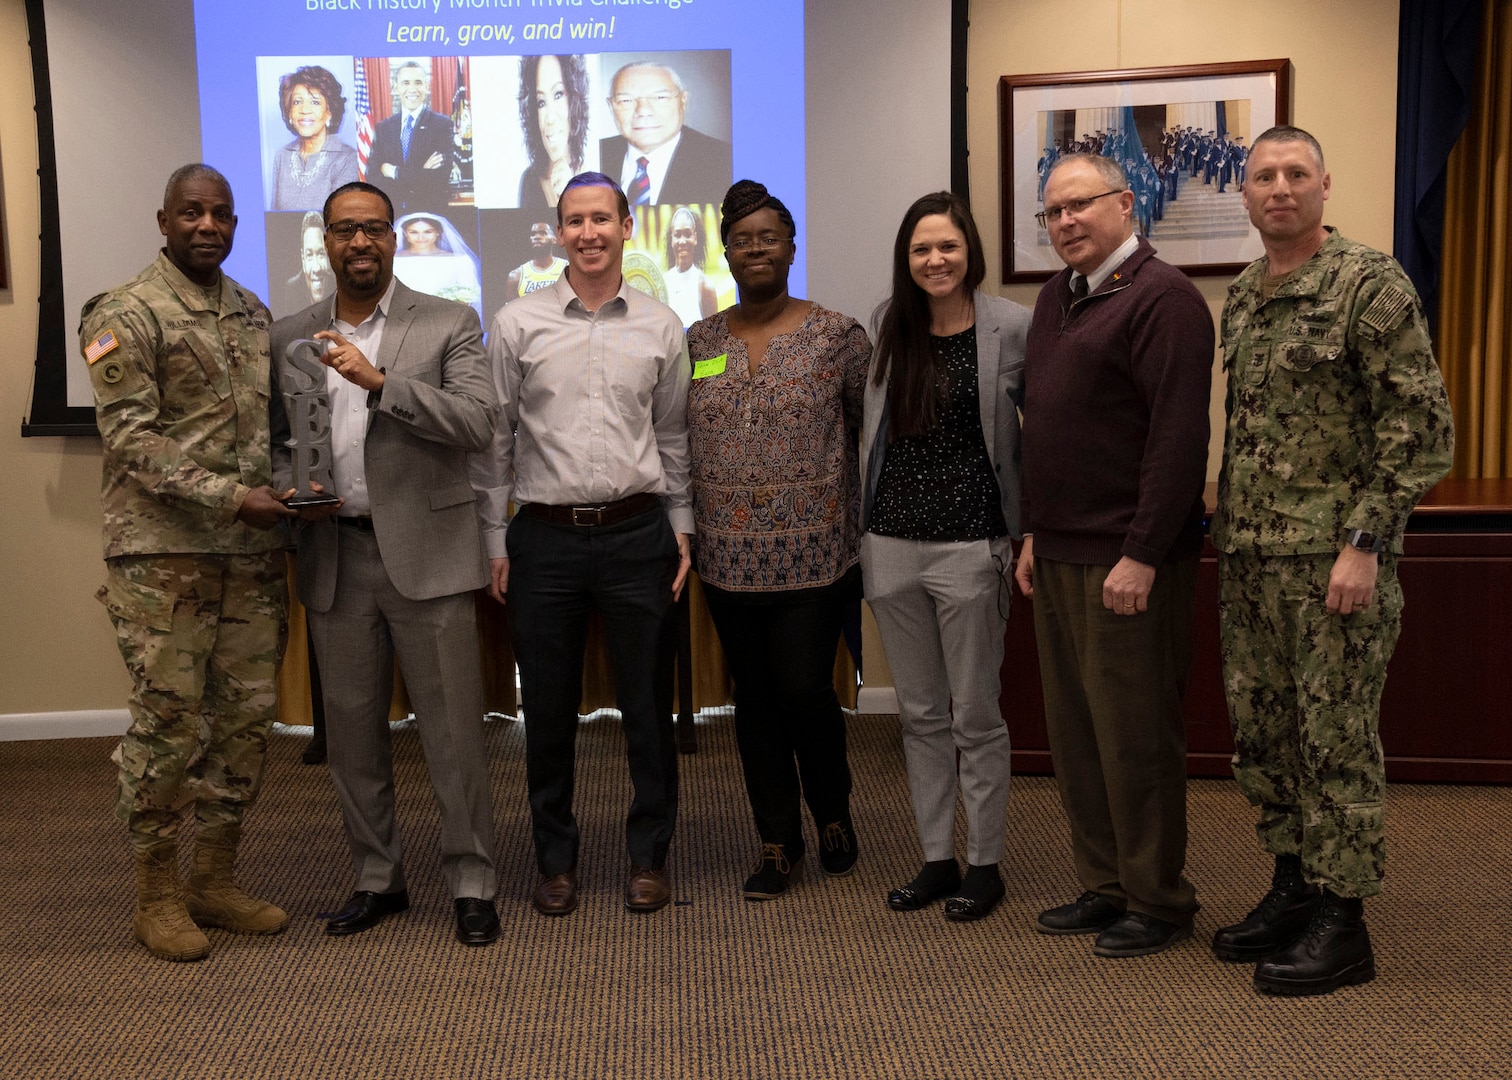 DLA Director Army Lt. Gen. Darrell Williams (left) and Navy Command Master Chief Shaun Brahmsteadt (far right) present the 5-person DLA team with a special emphasis program award for their win during the Black History Month trivia challenge, Feb. 27.